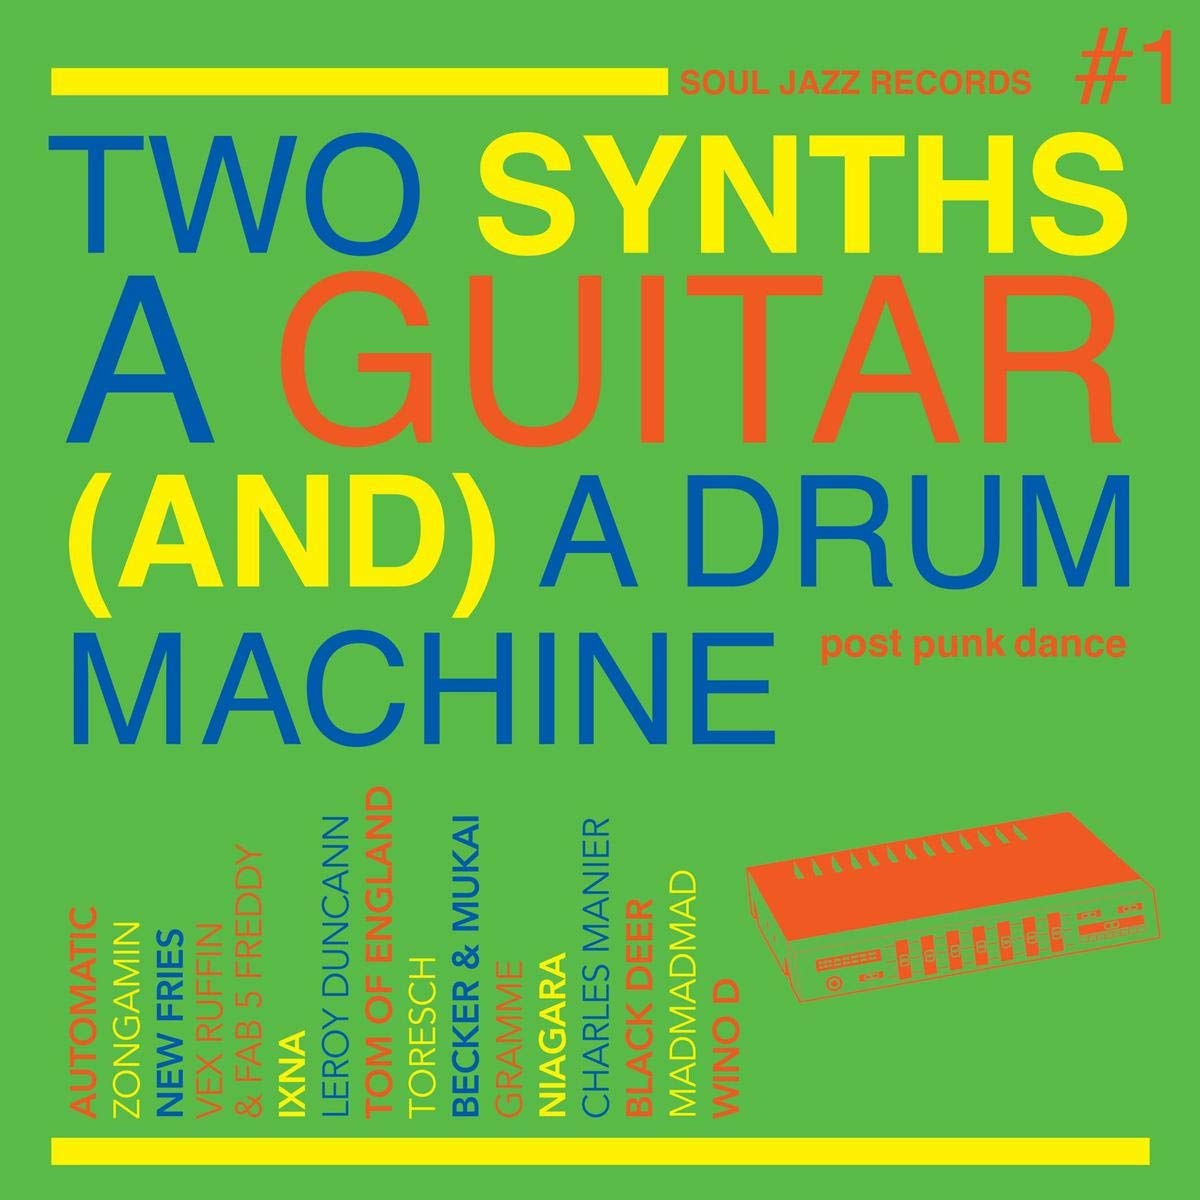 Various Artists - Soul Jazz Records Two Synths A Guitar (And) a Drum Machine Post Punk Dance